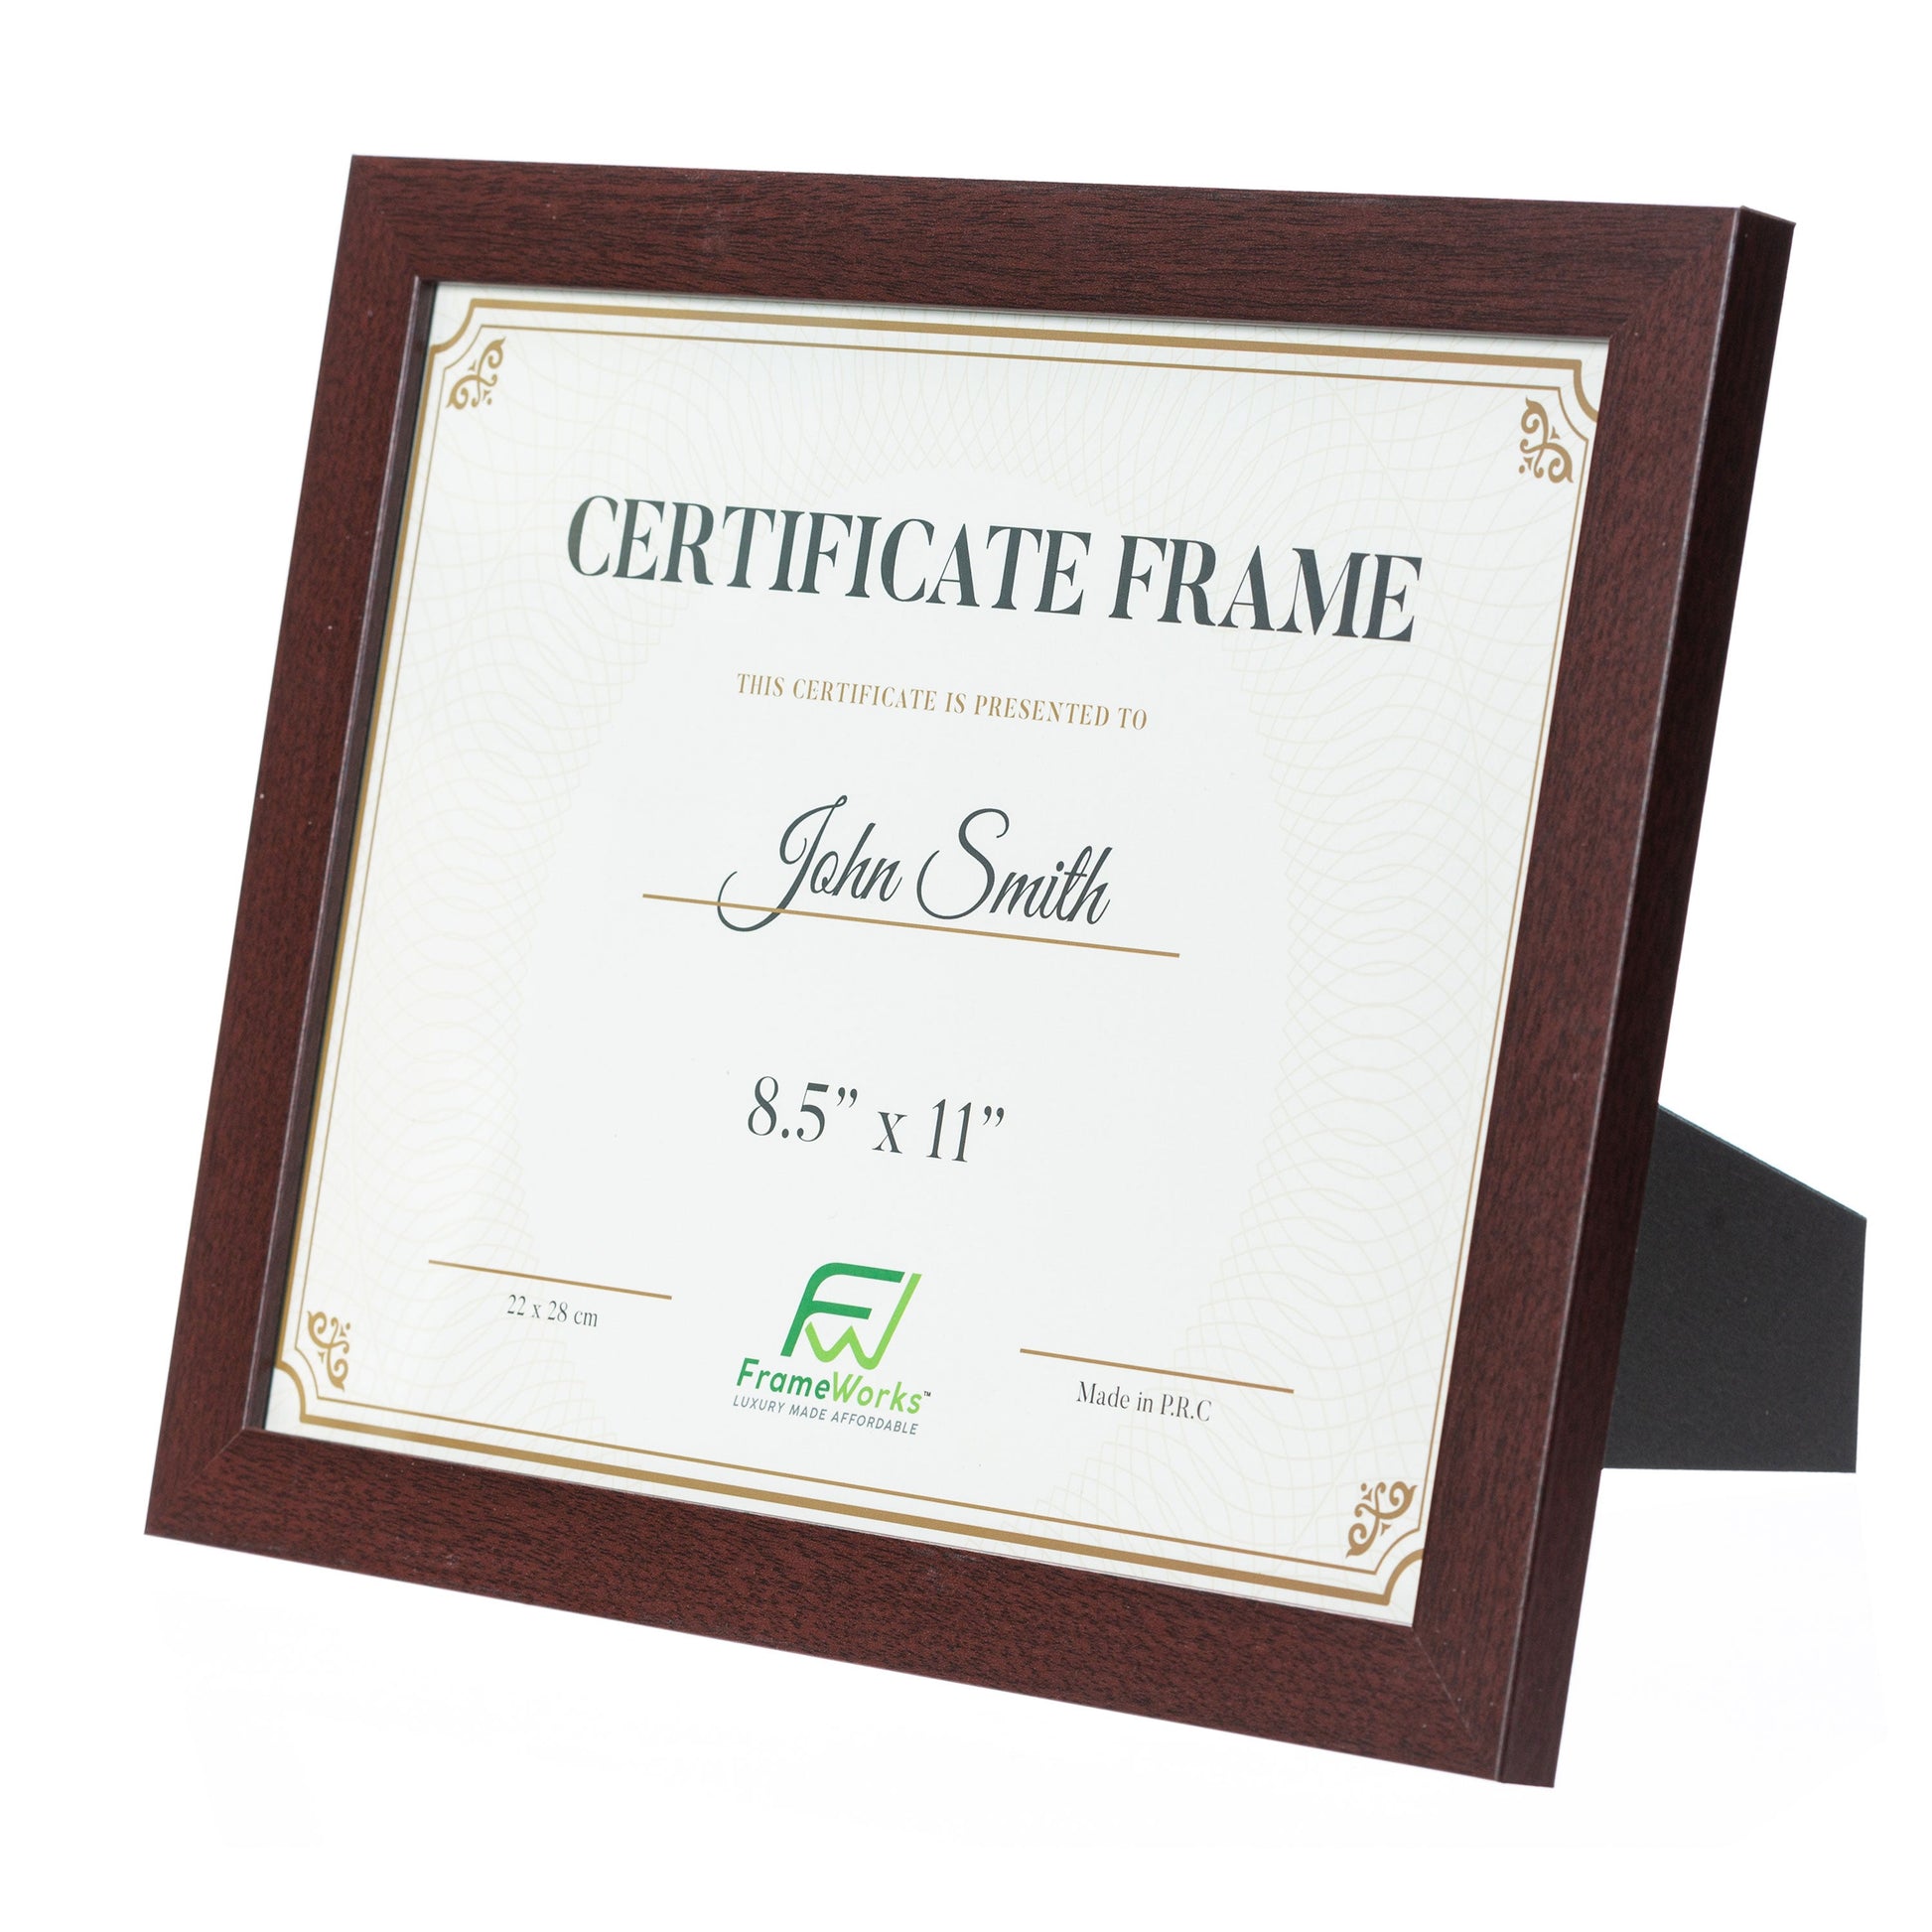 8.5" x 11" Classic Mahogany Wood Document Picture Frame with Tempered Glass